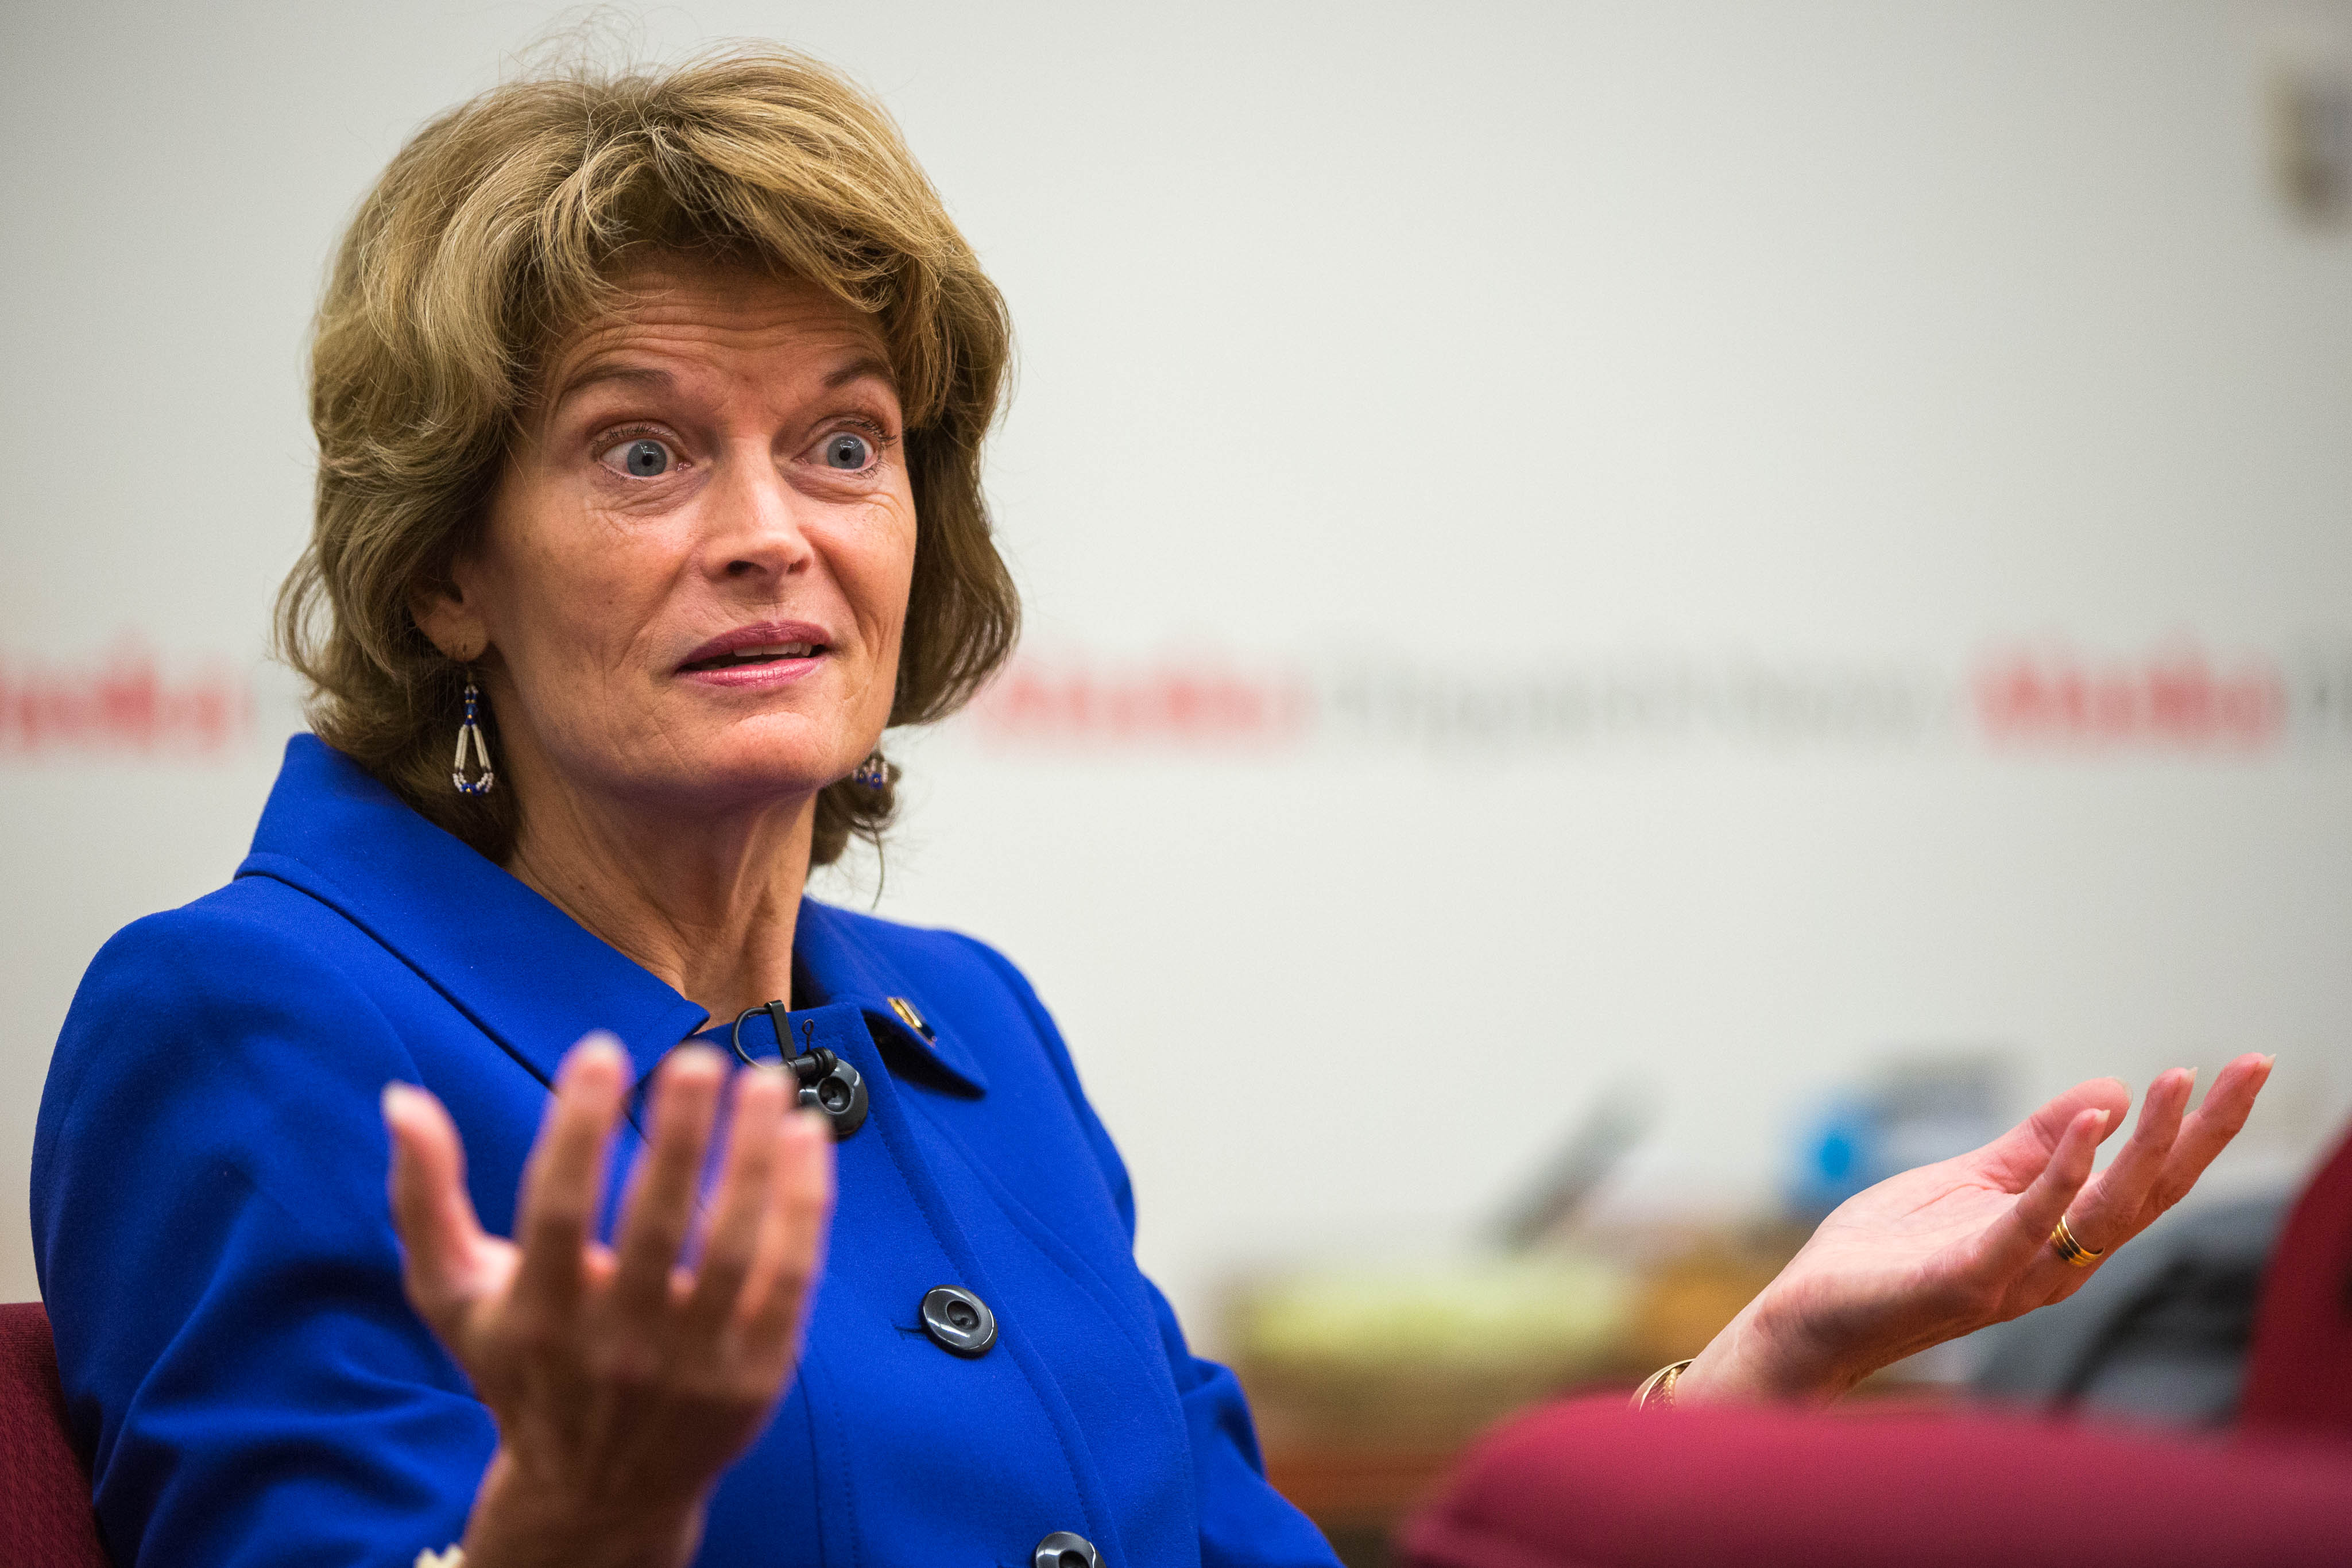 Sen. Lisa Murkowski speaks with reporters at the Alaska Dispatch News offices on Wednesday, October 14, 2015. (Loren Holmes / Alaska Dispatch News)